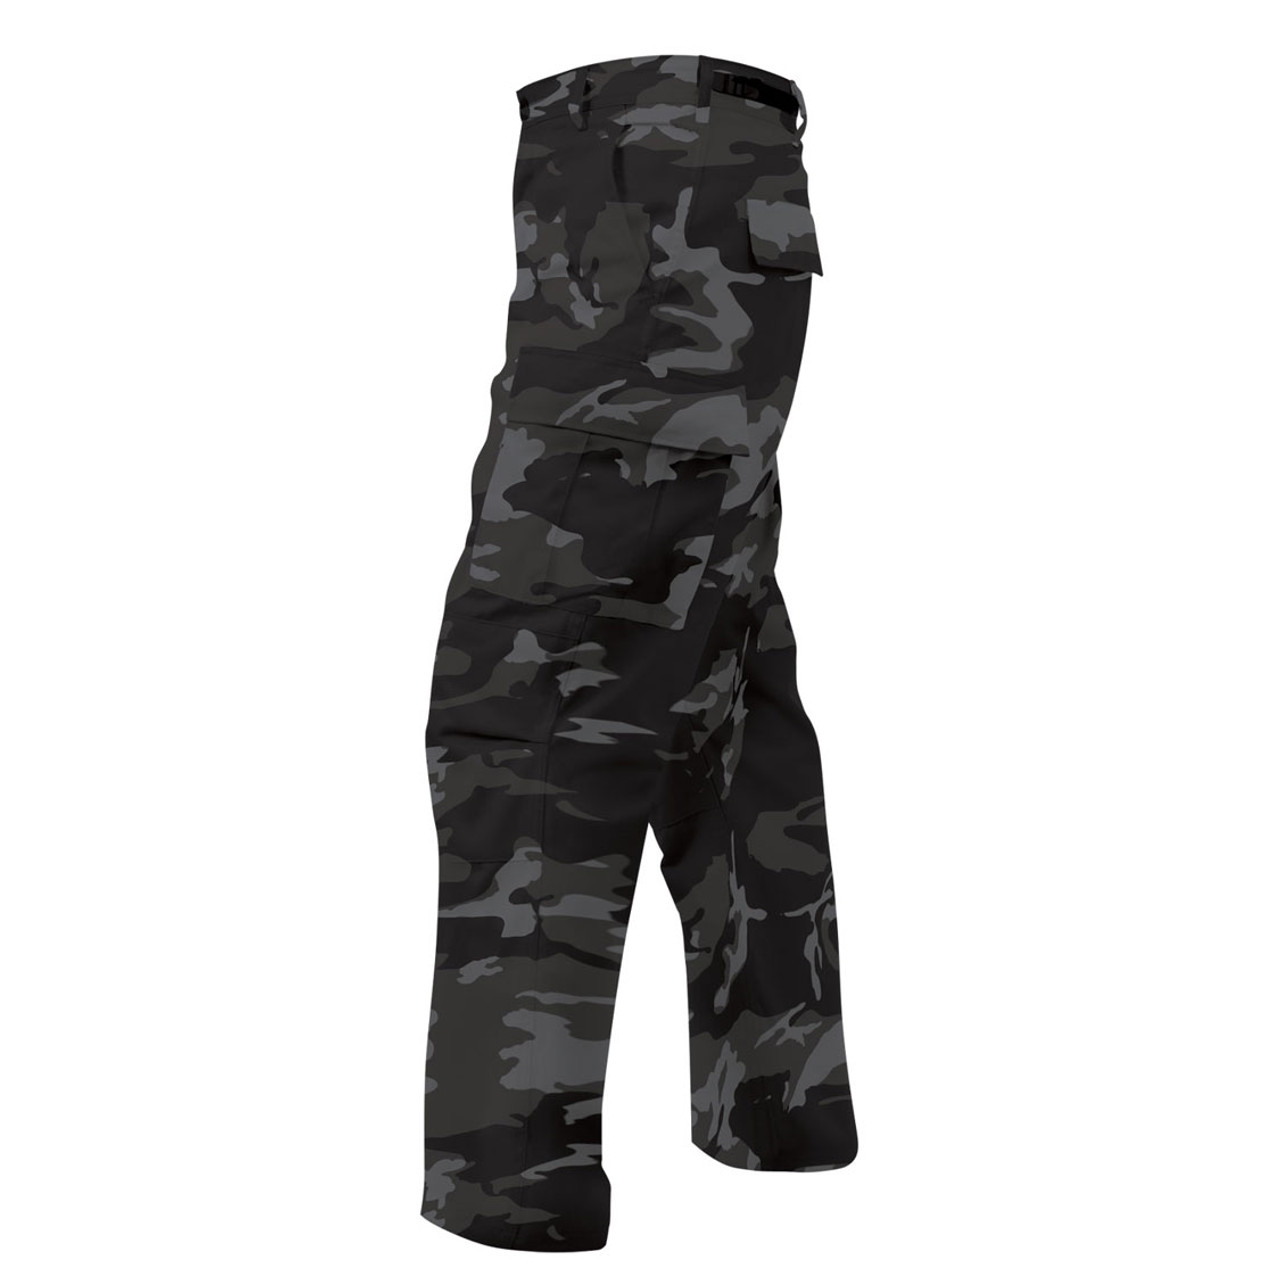 Navy Blue Camo Military Style Pants - Army Supply Store Military